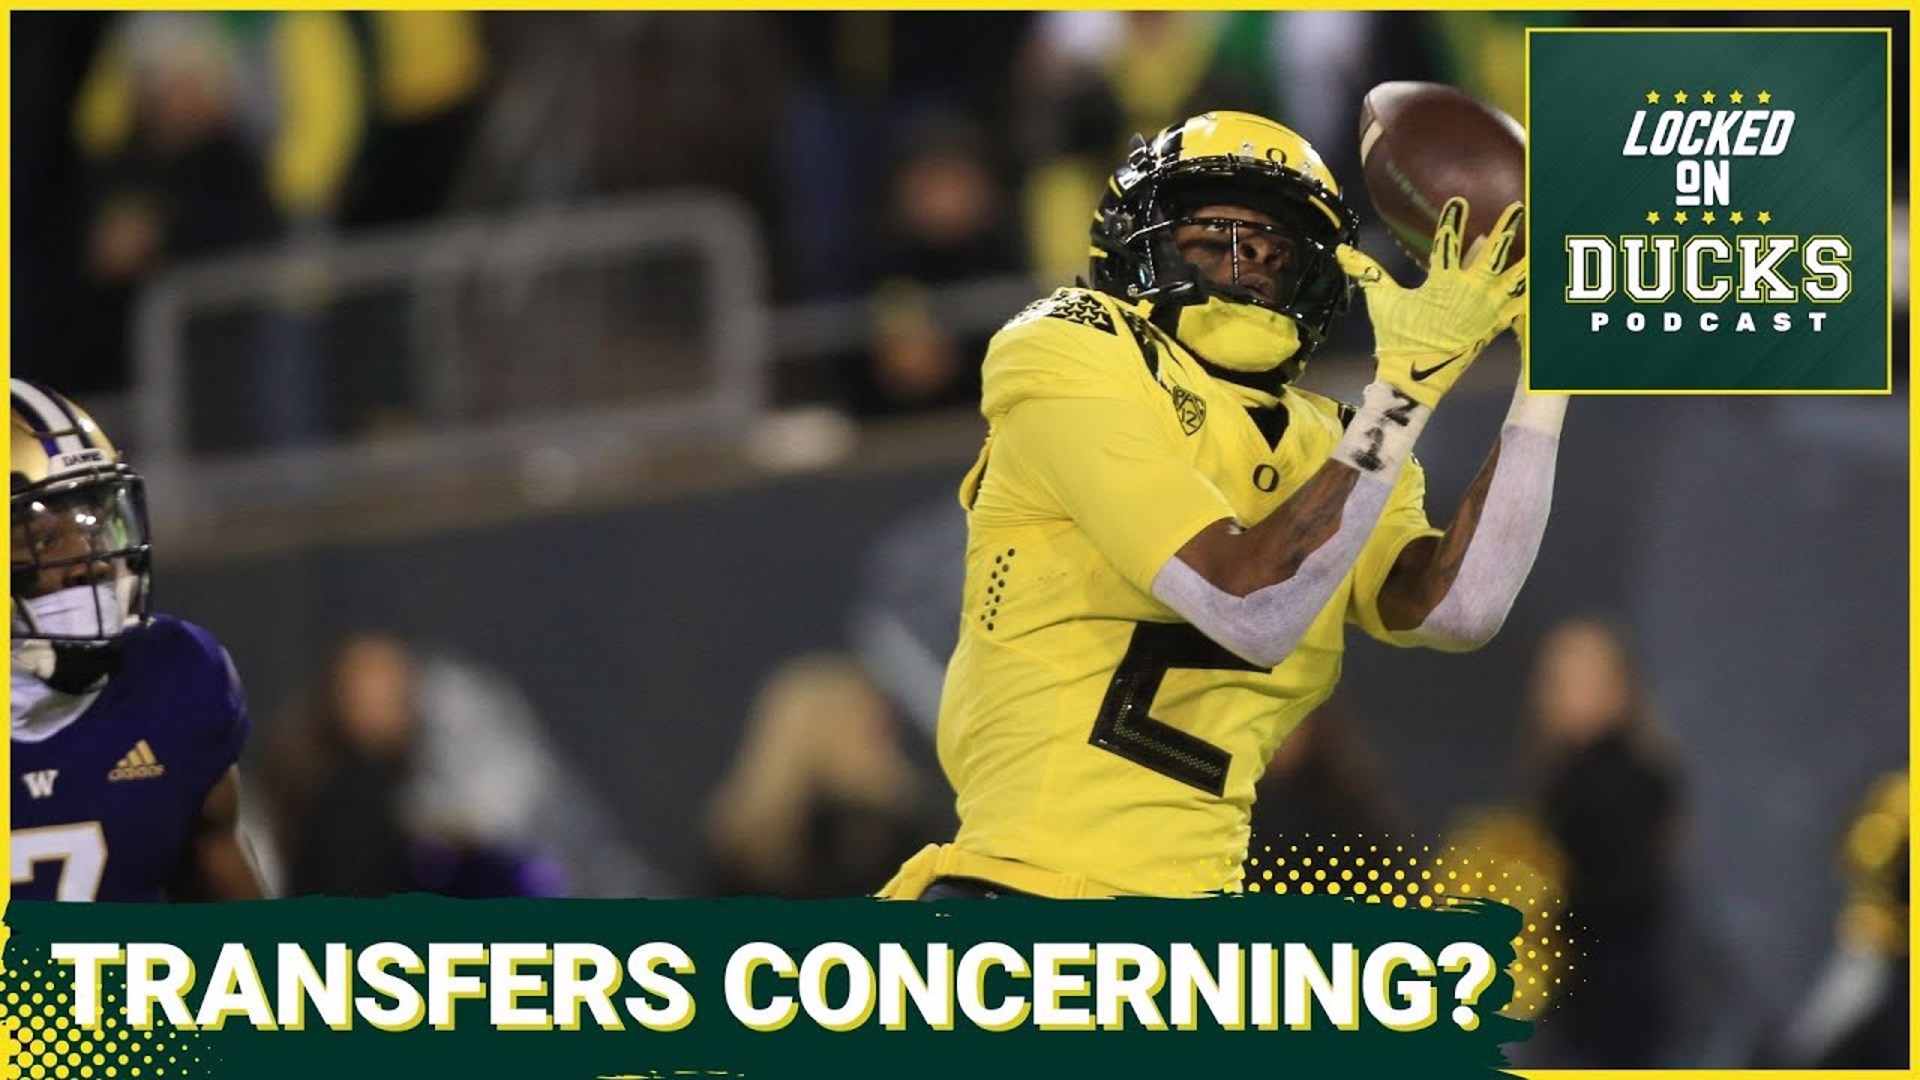 Several Oregon players have announced their intentions to enter the transfer portal and leave the program, with Dont'e Thornton perhaps the most impactful player.